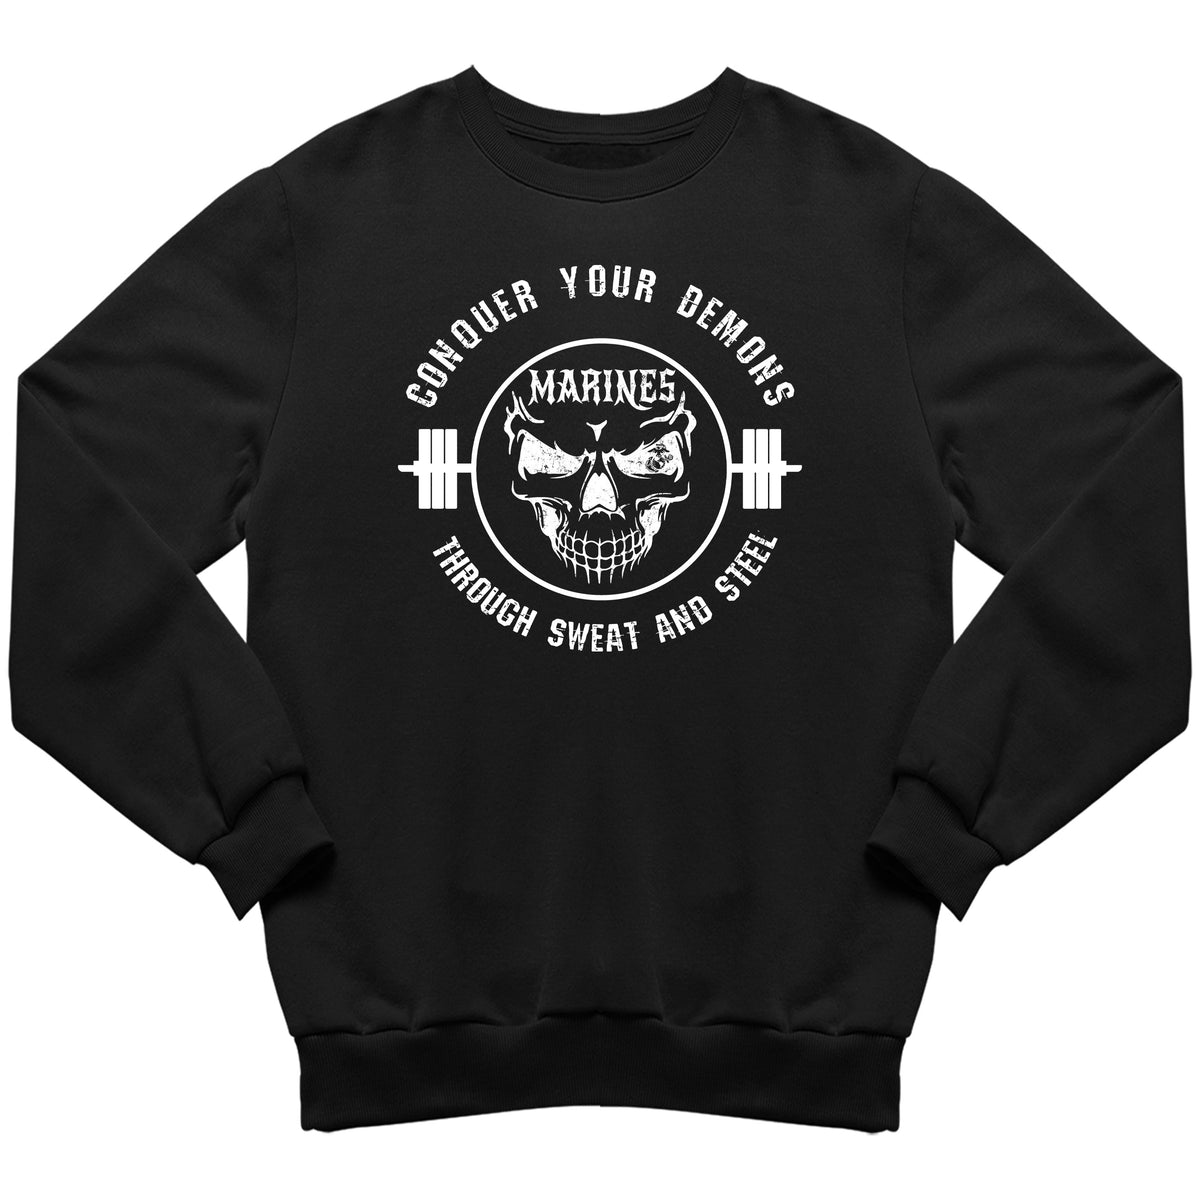 Conquer Your Demons Sweatshirt